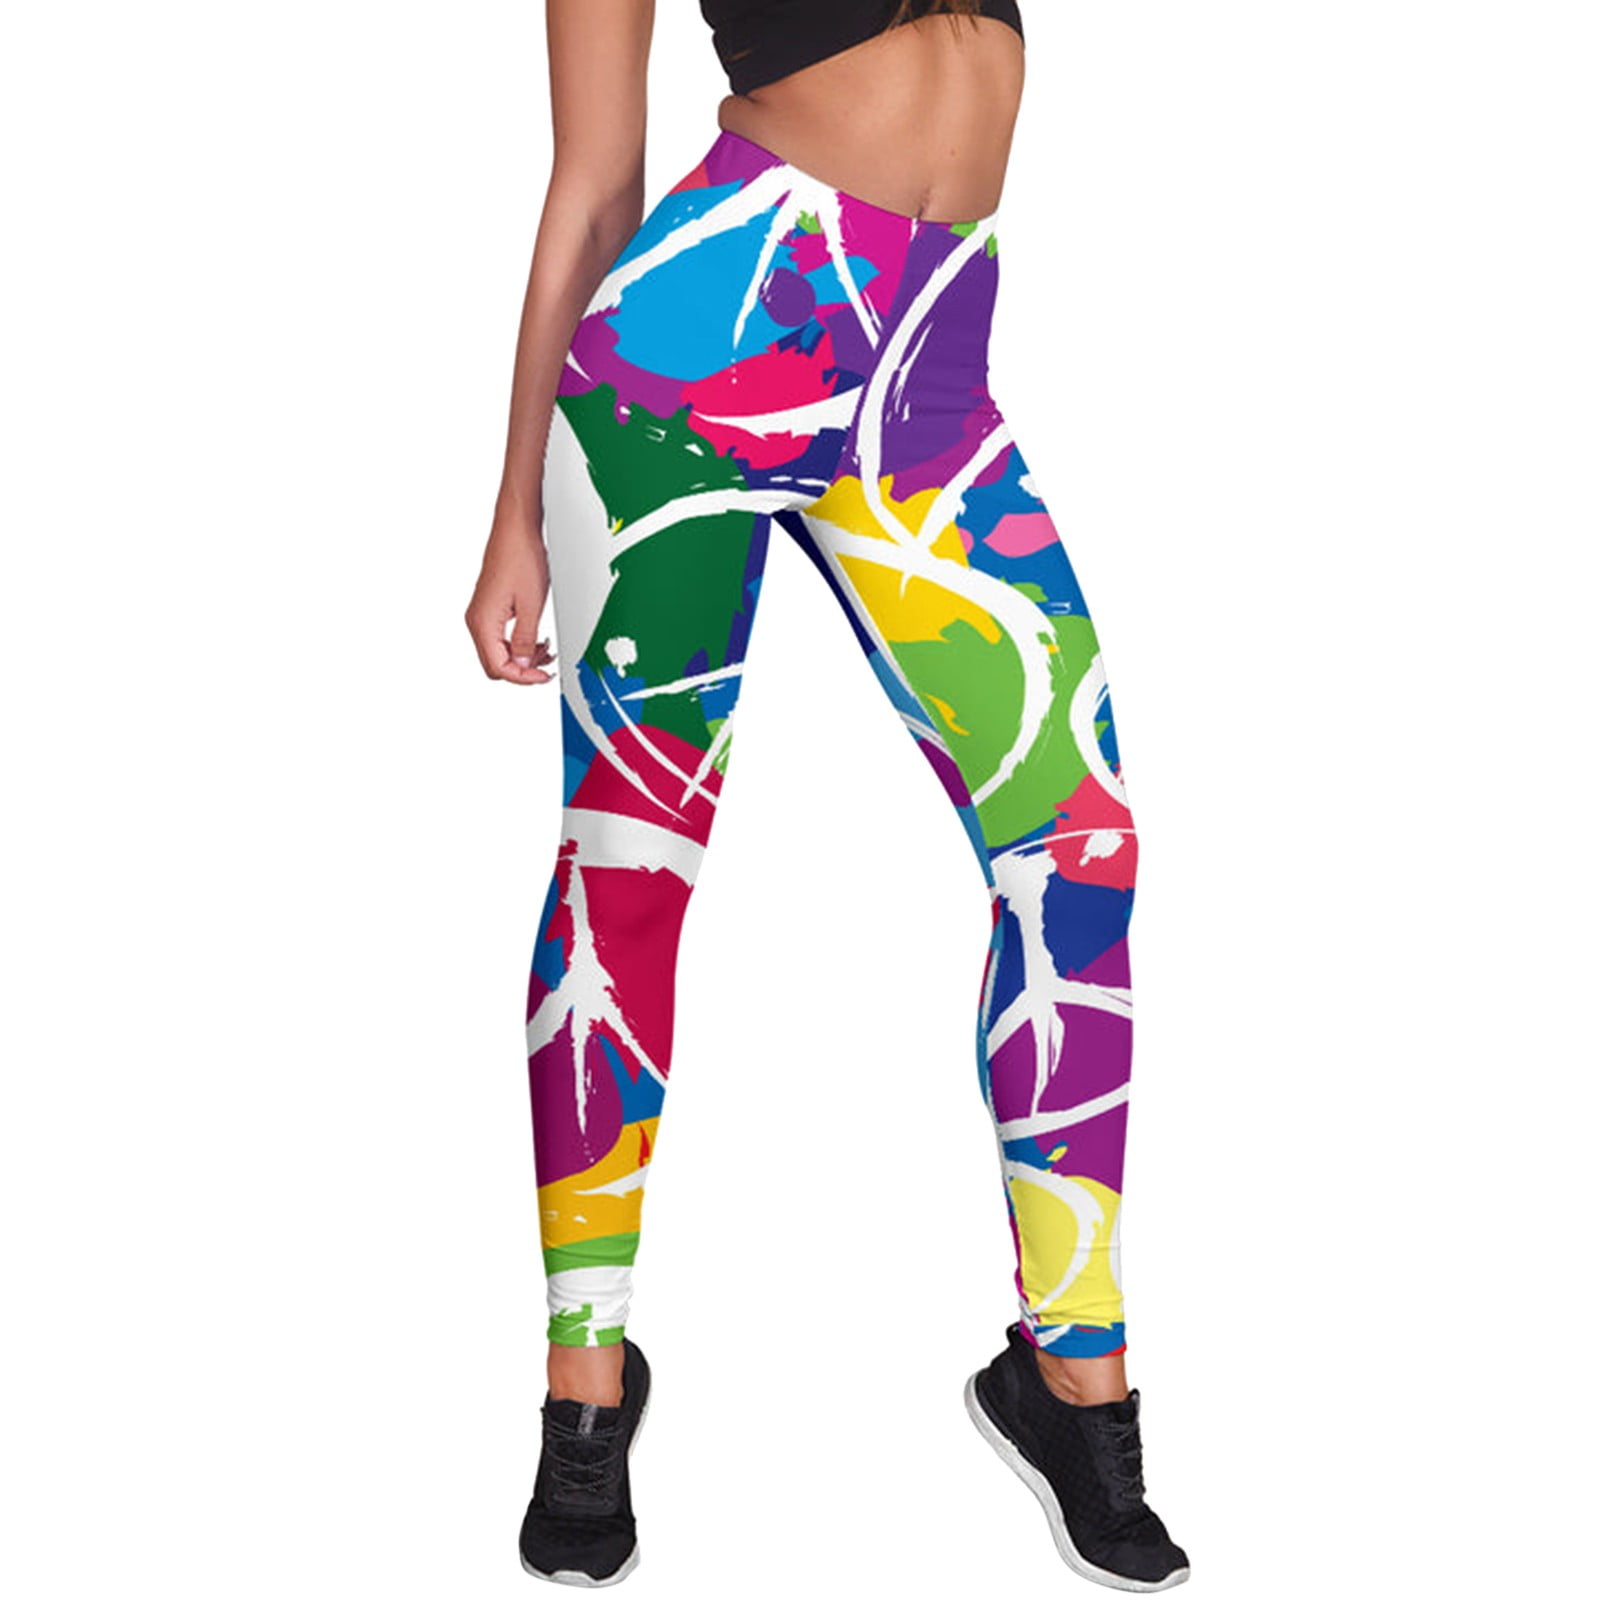 High Waist Yoga Pants Seamless Tie Dye Sports Leggings Tummy Control Workout  Running Yoga Leggings Comfortable Shapewear Keeps You Hugged In And Looking  Slim Colors From Healthy521, $9.53 | DHgate.Com